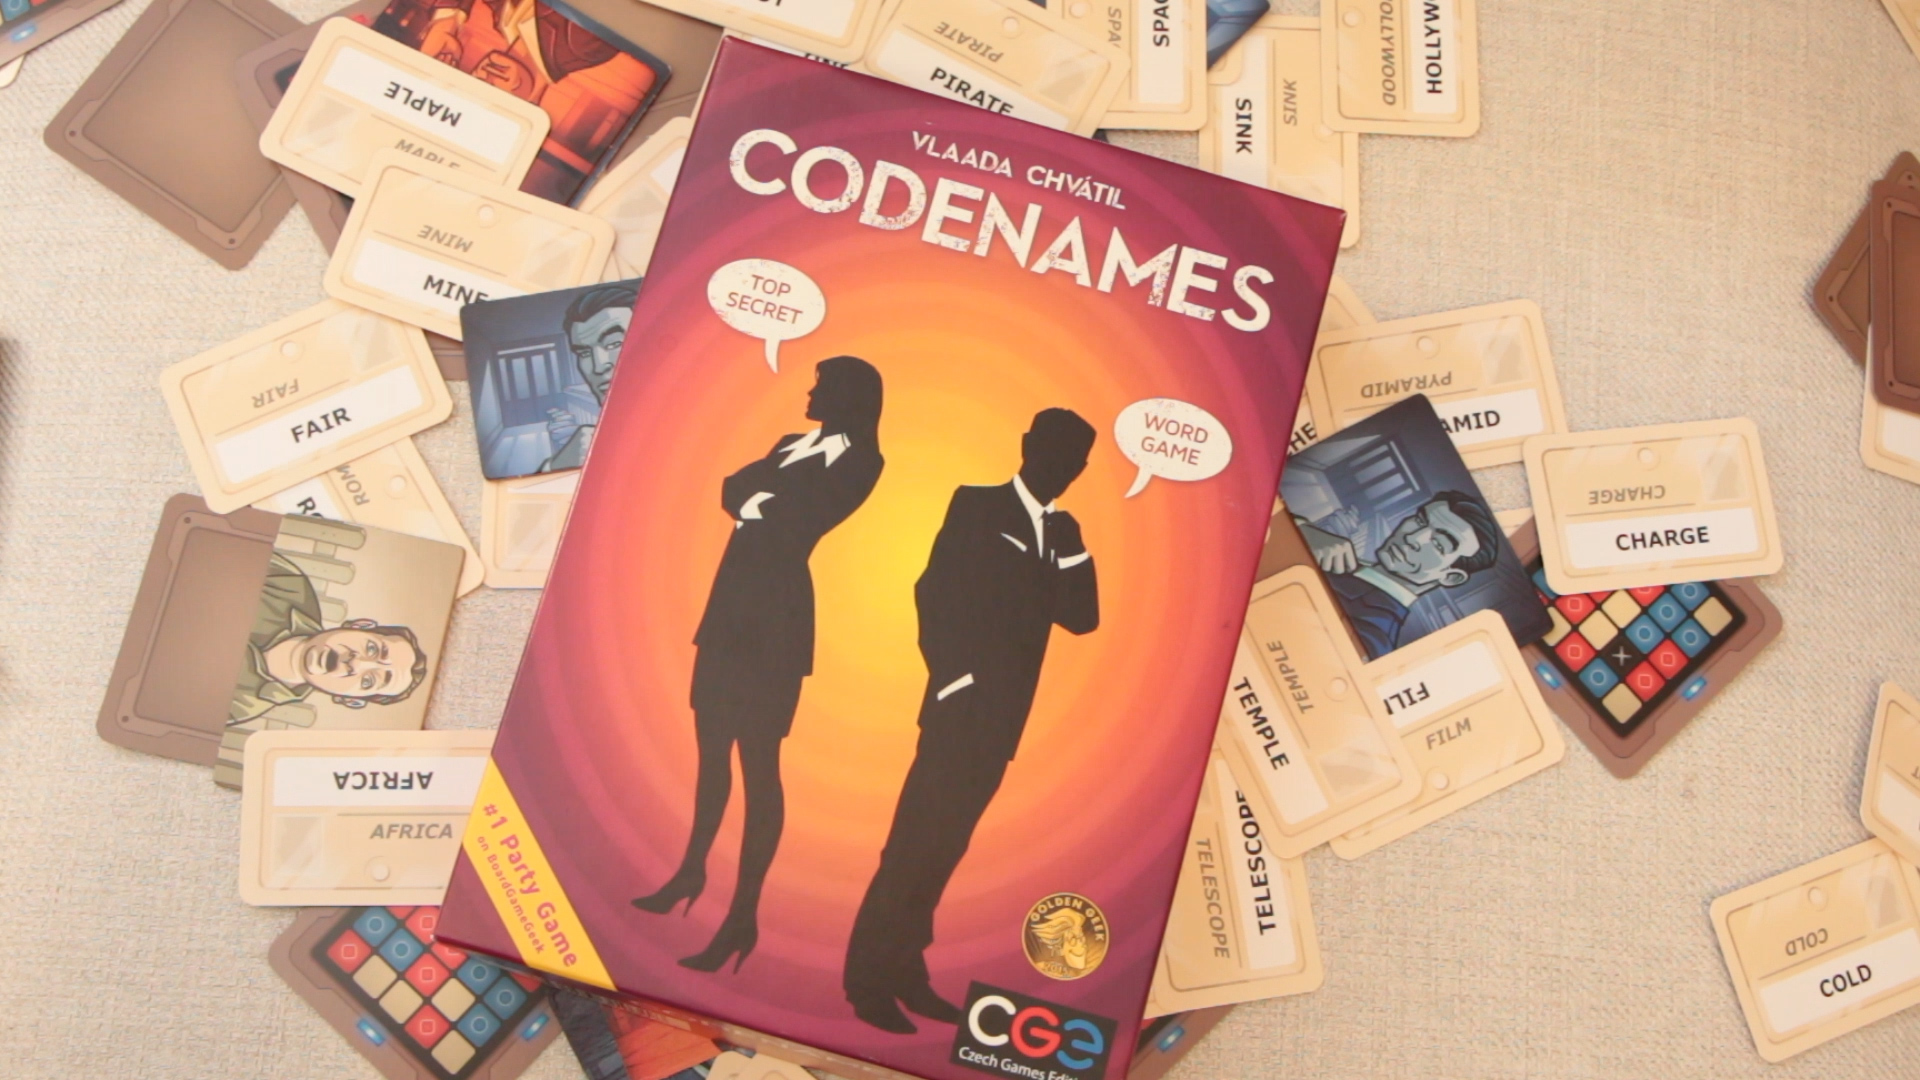 A box for the board game Codenames lays on a messy pile of cards from the game.